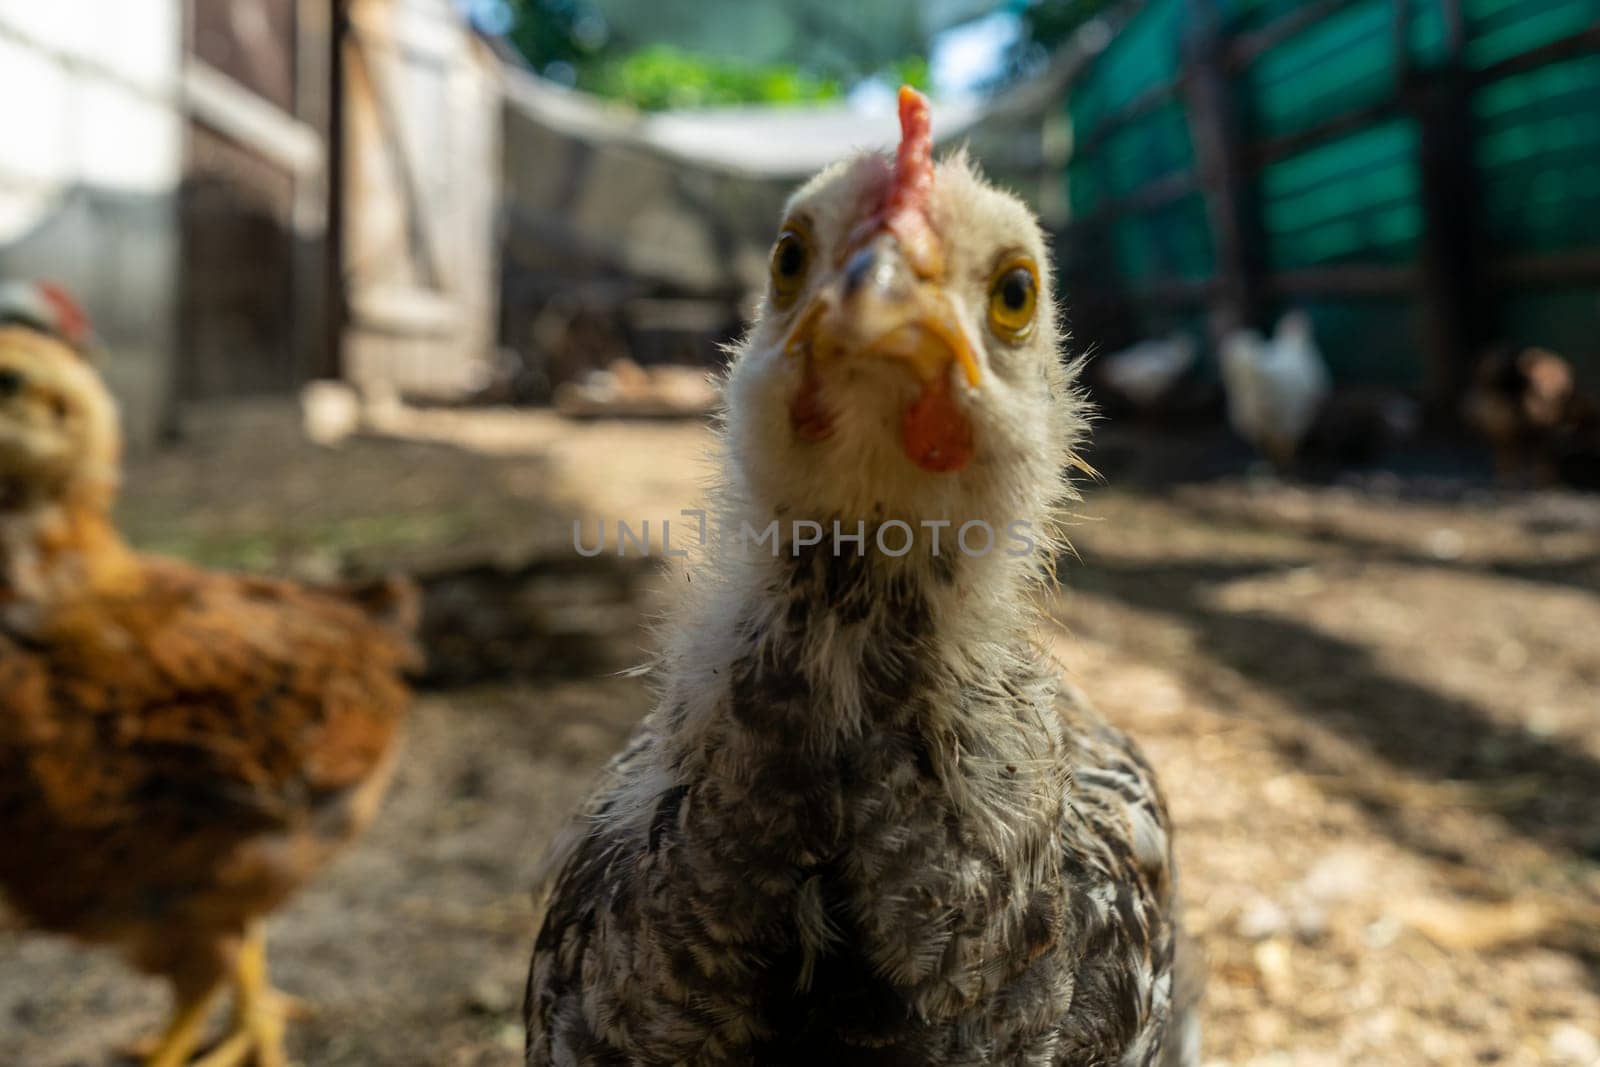 chicken looks into the lens in coop. Home farm in village